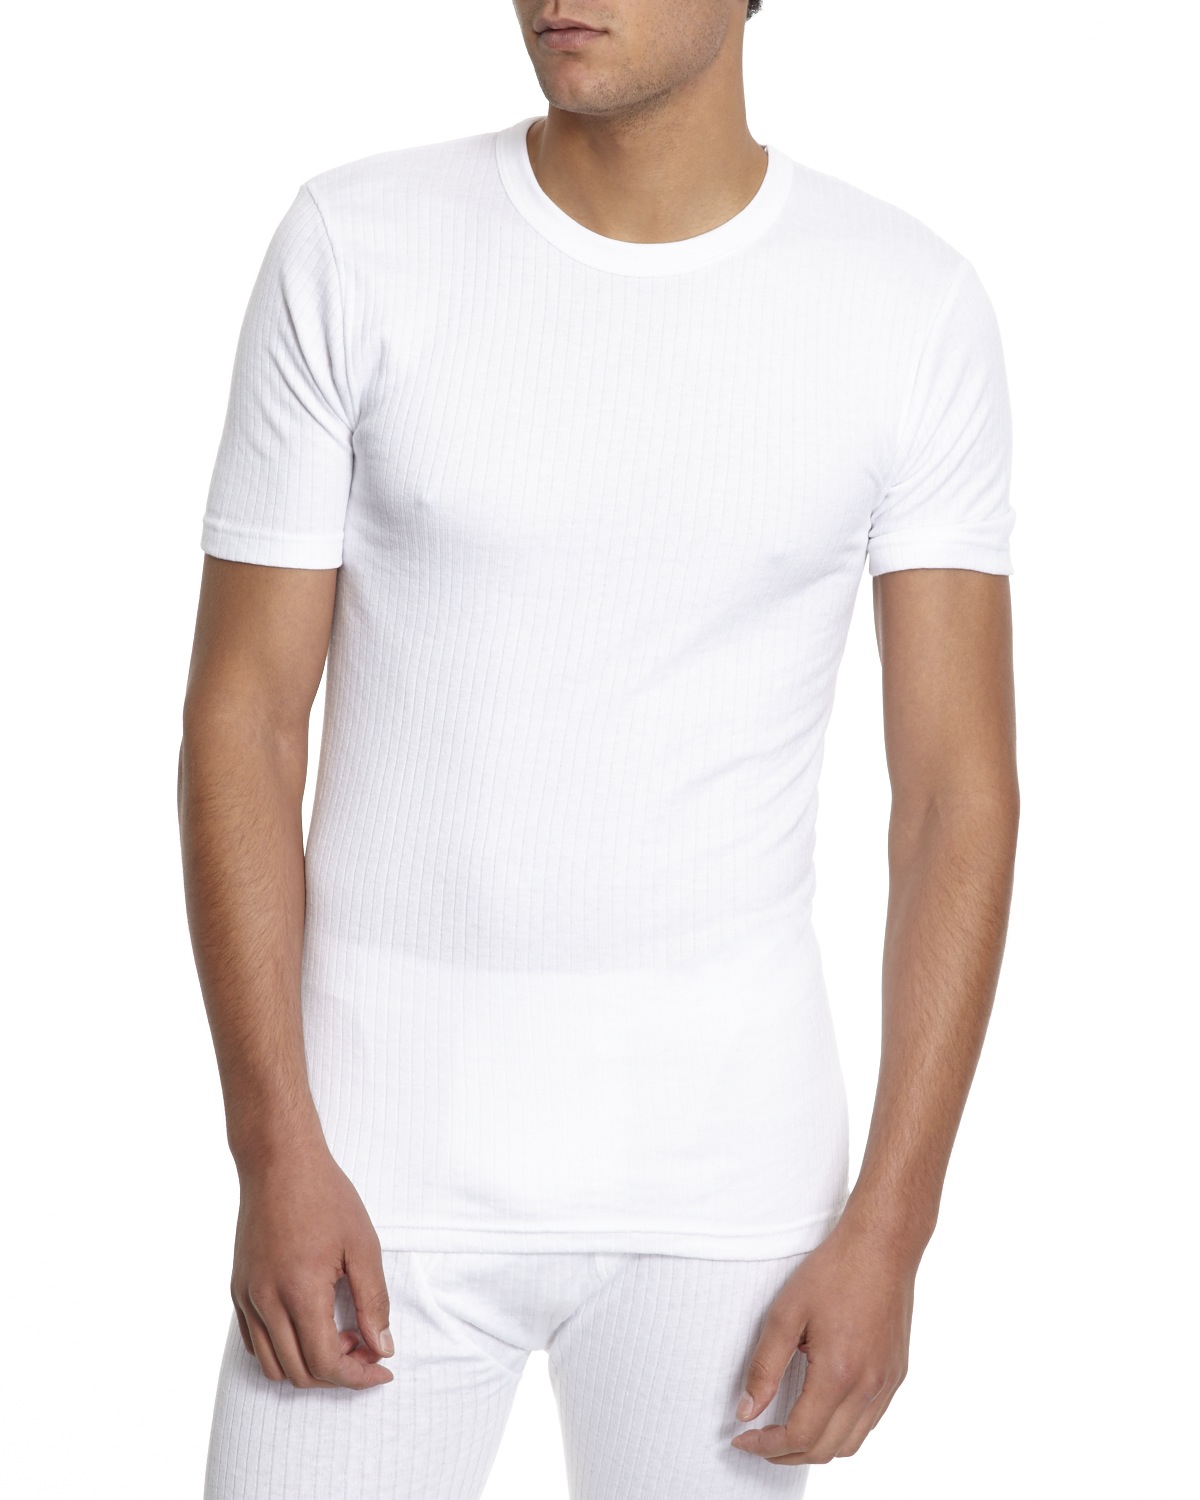 Dunnes Stores | White Thermal T-shirt - 2 Pack